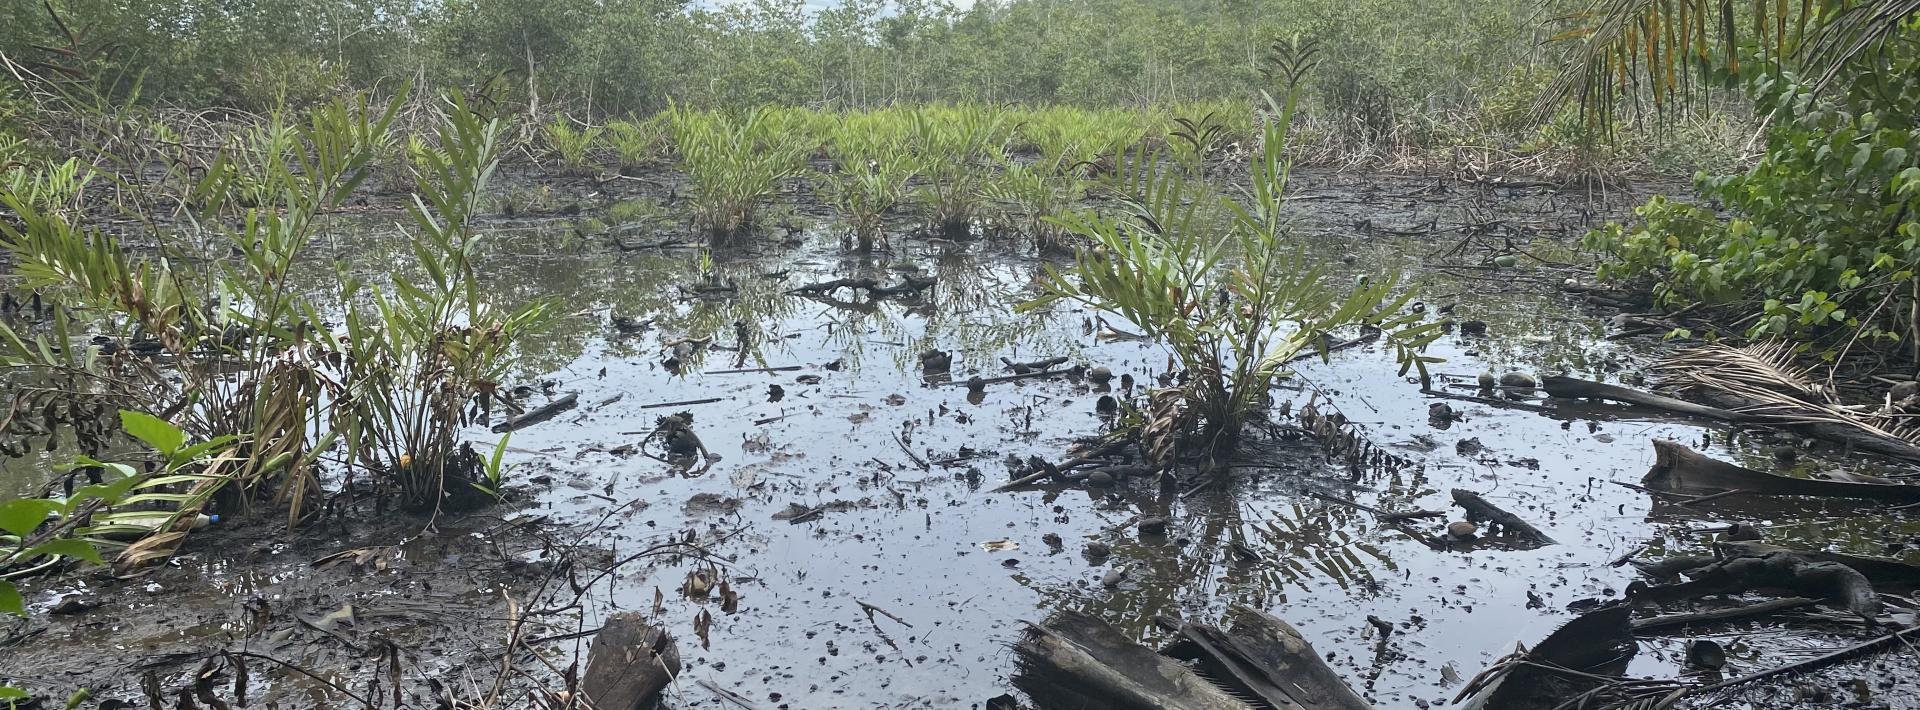 After oil spills in Niger Delta, proper clean up hardly takes place. Photo: Justice Nwafor